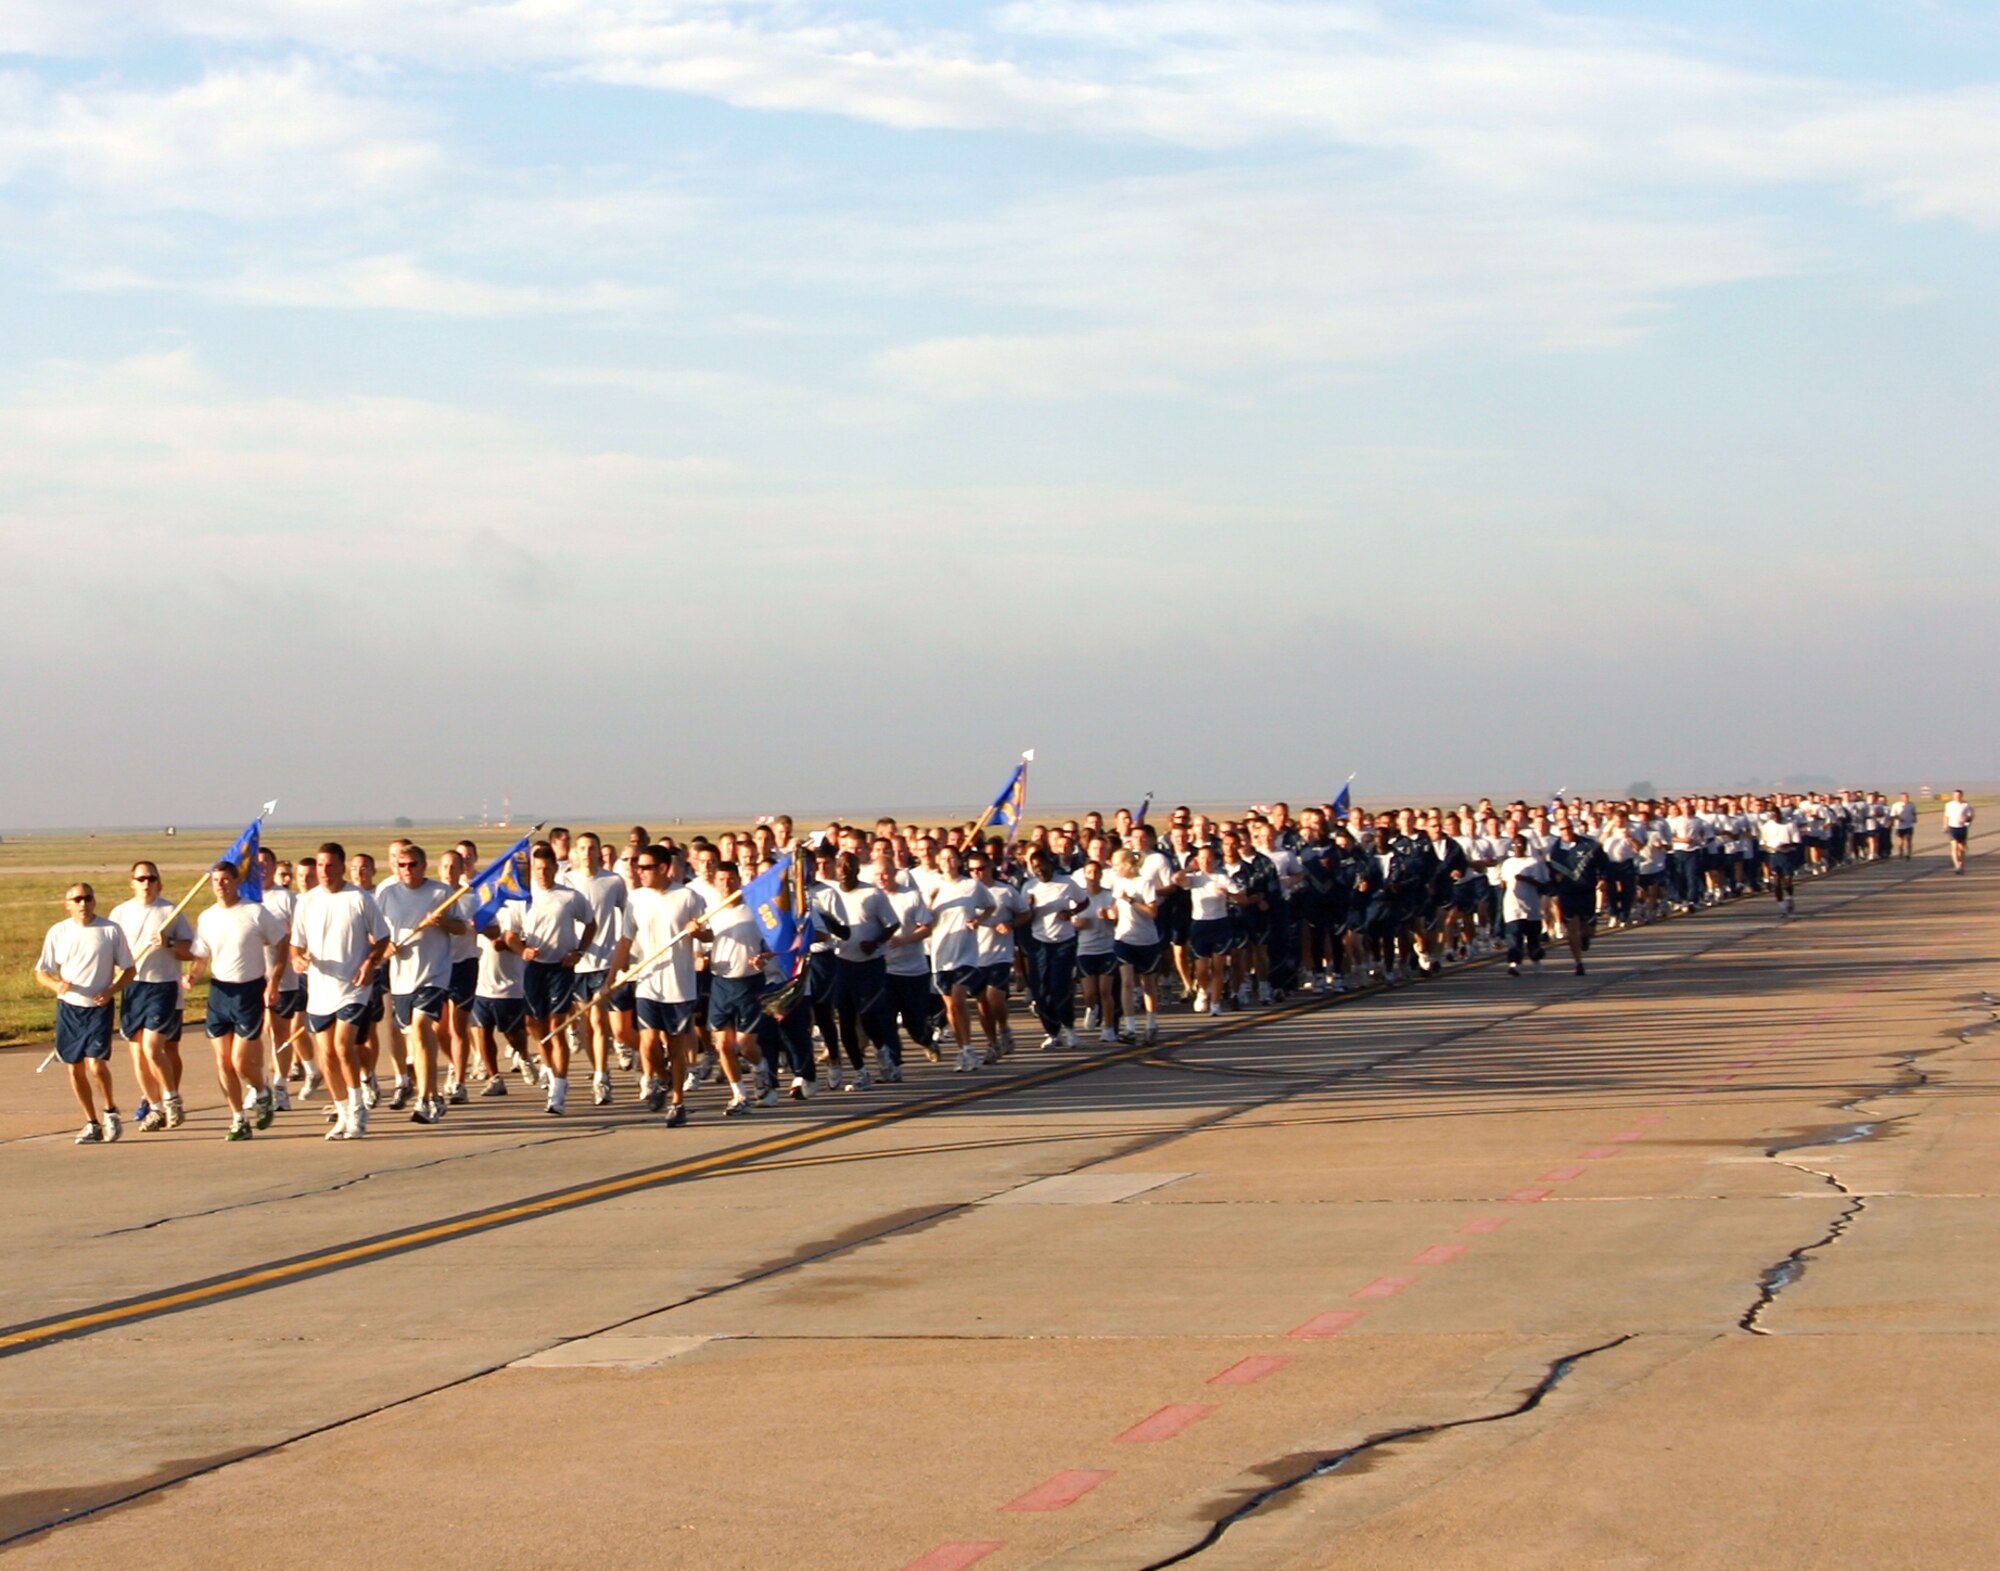 CANNON AIR FORCE BASE, N.M. -- Airmen run in formation during a two-mile commando run on the base flightline Tuesday morning. Airmen from the 27th Special Operations Group and 27th Special Operations Maintenance Group participated in the run. (U.S. Air Force photo by Airman Elliott Sprehe)